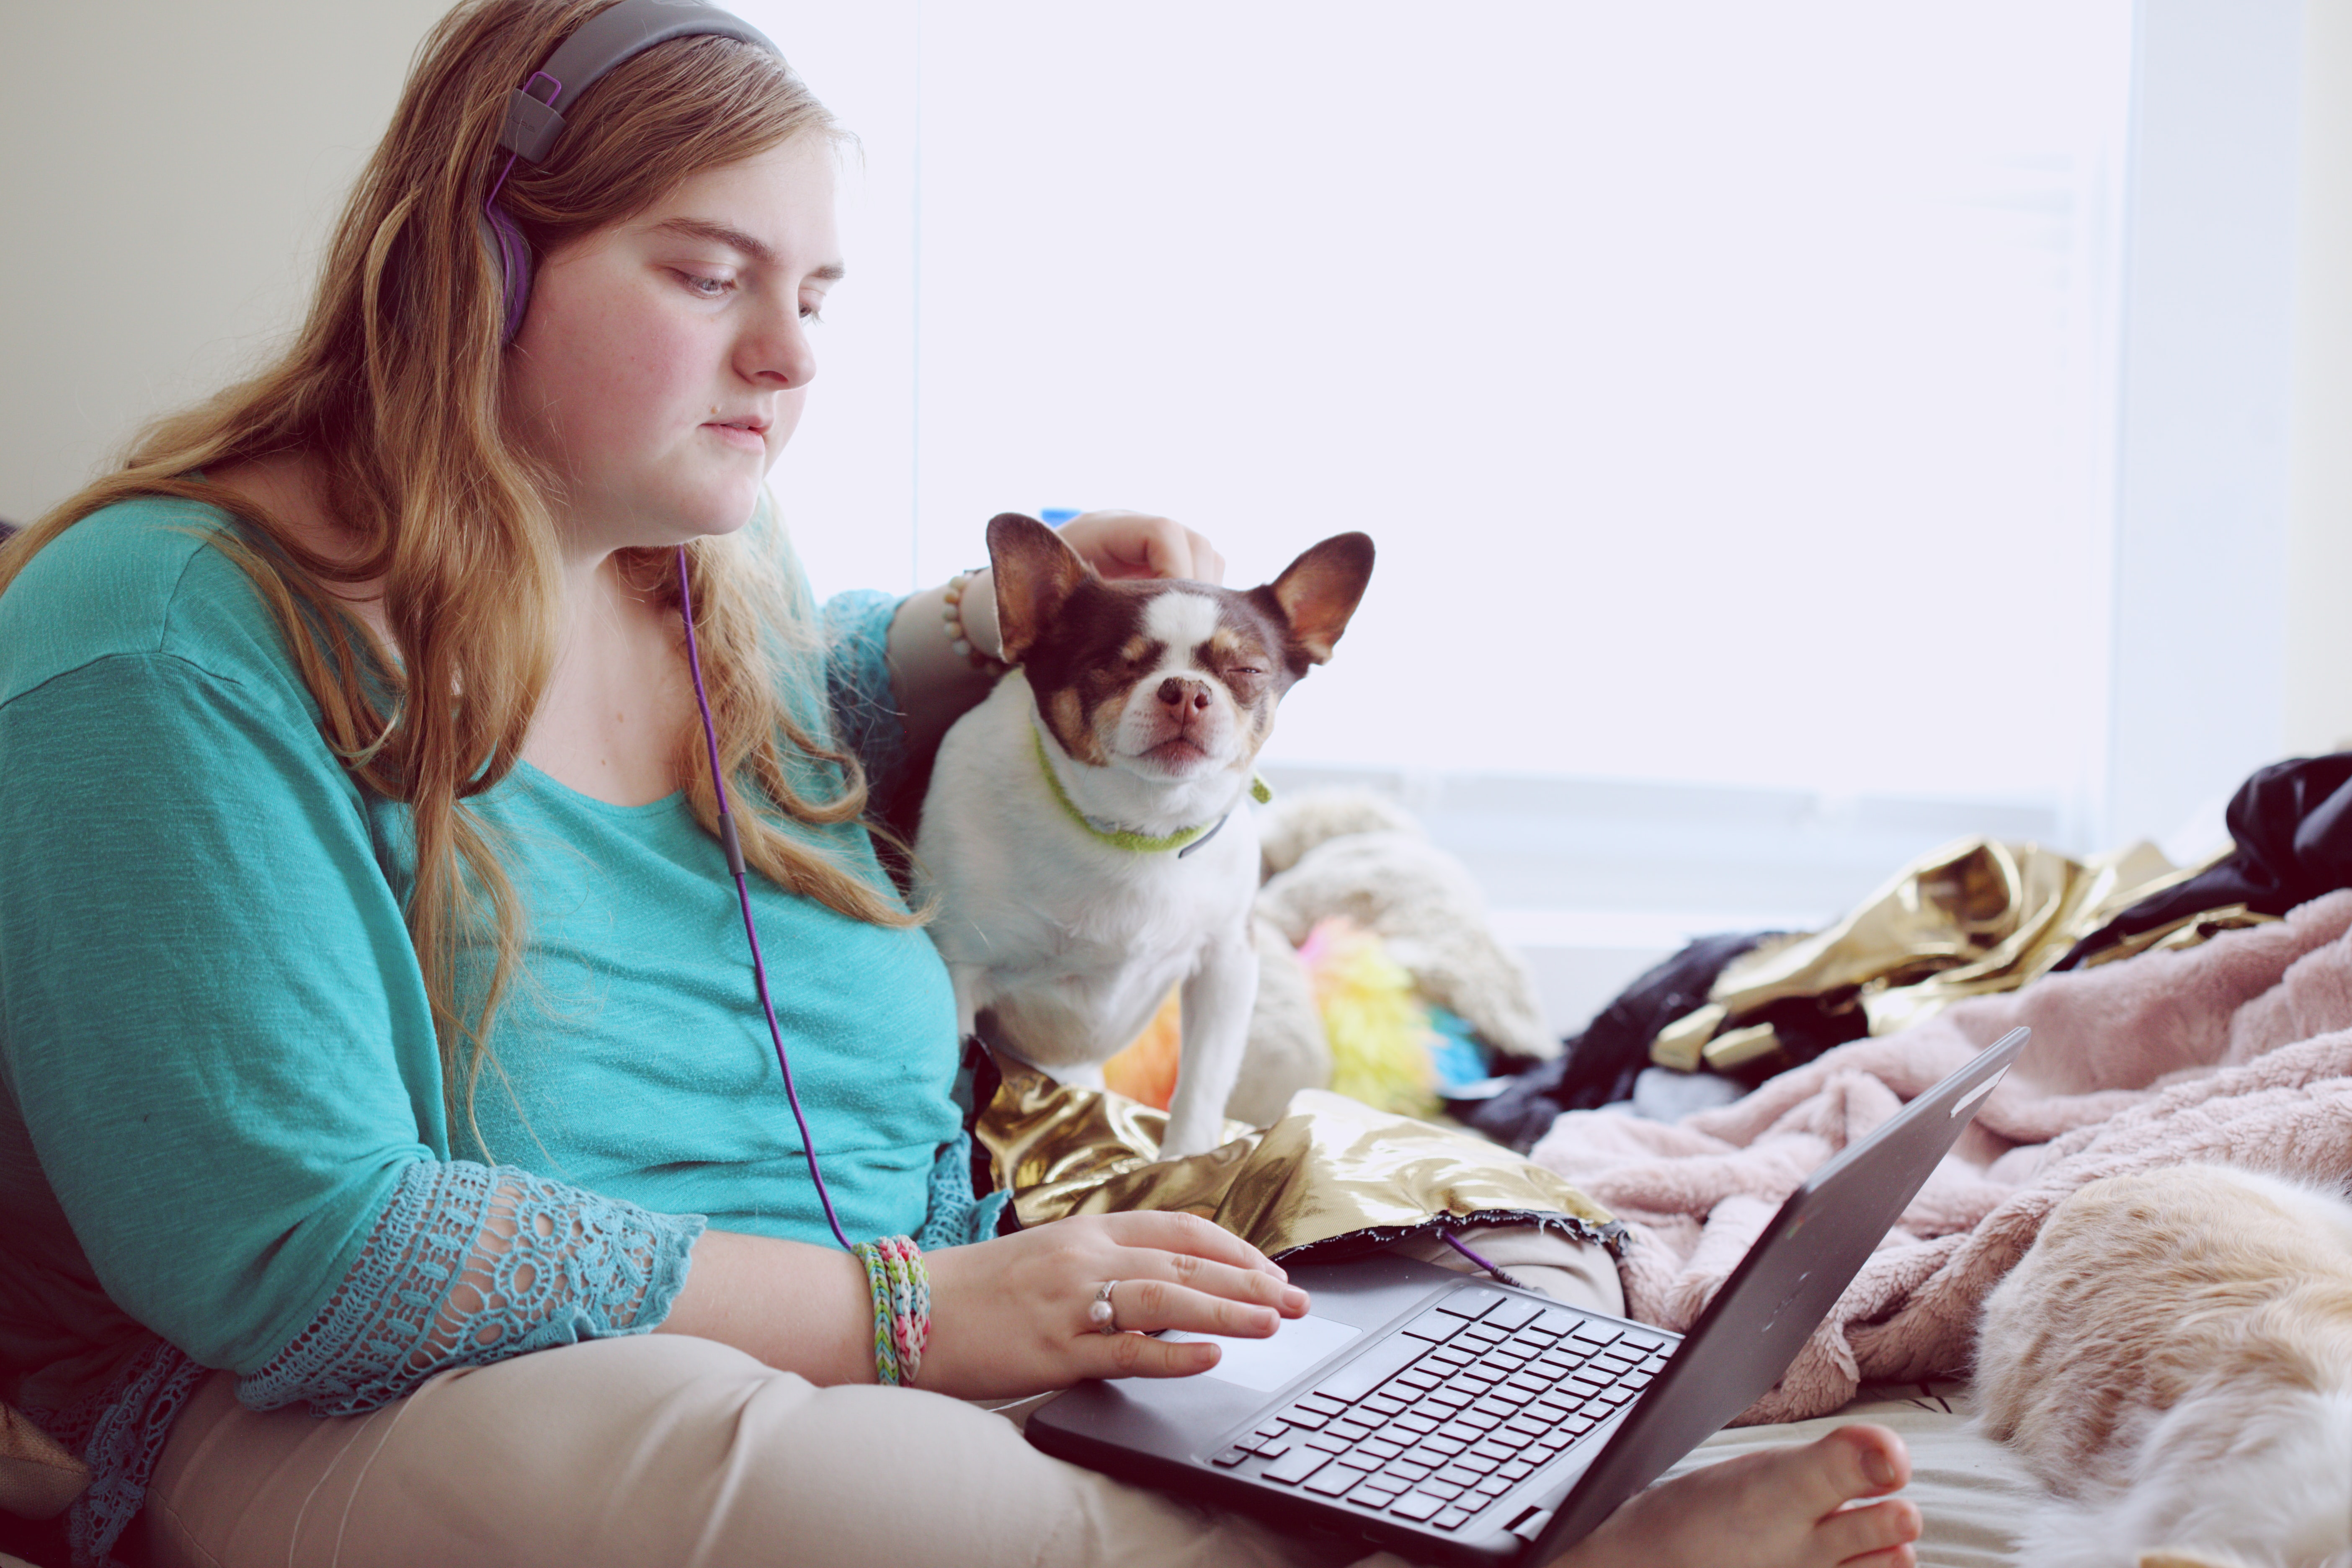 Image shows a 19 year old woman sitting on a bed with a laptop and a dog